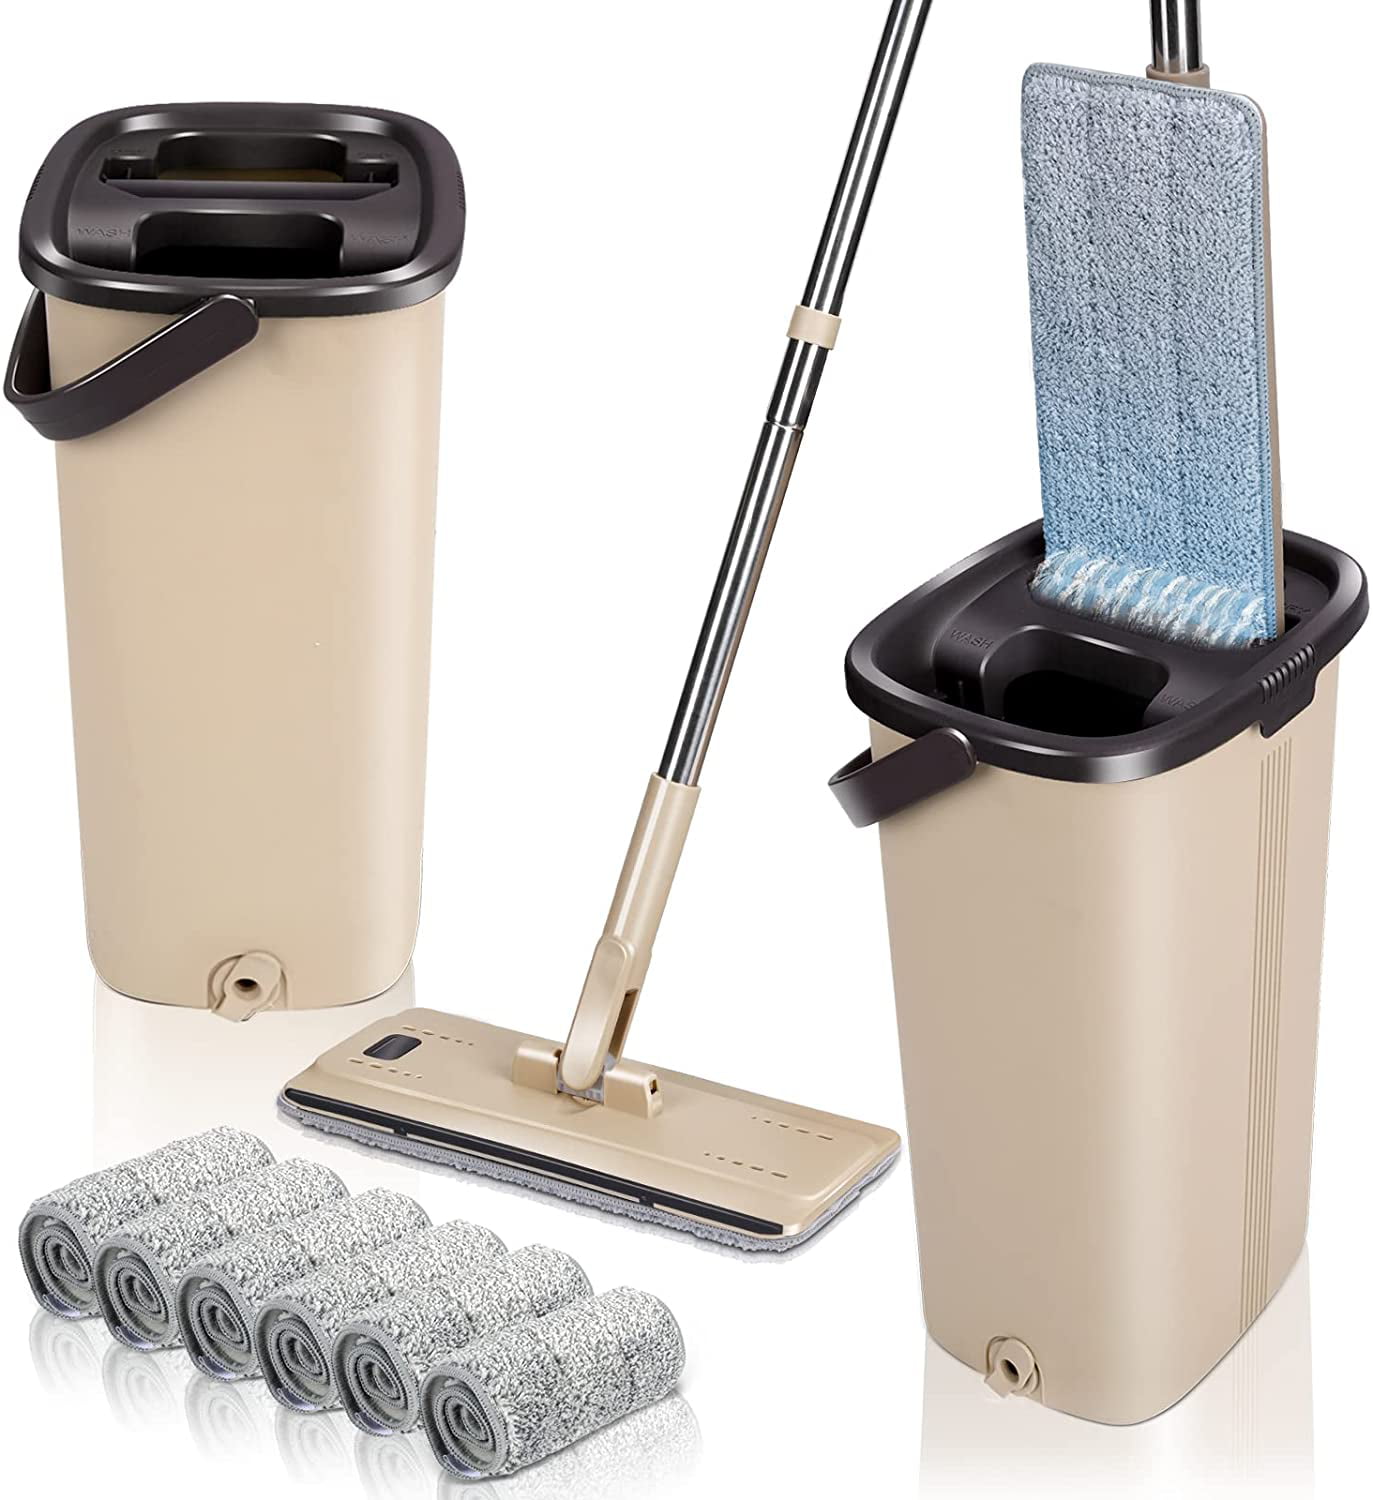 Squeeze Mop And Bucket Set Hand Free Flat Floor Self Cleaning Microfiber Pads 7 